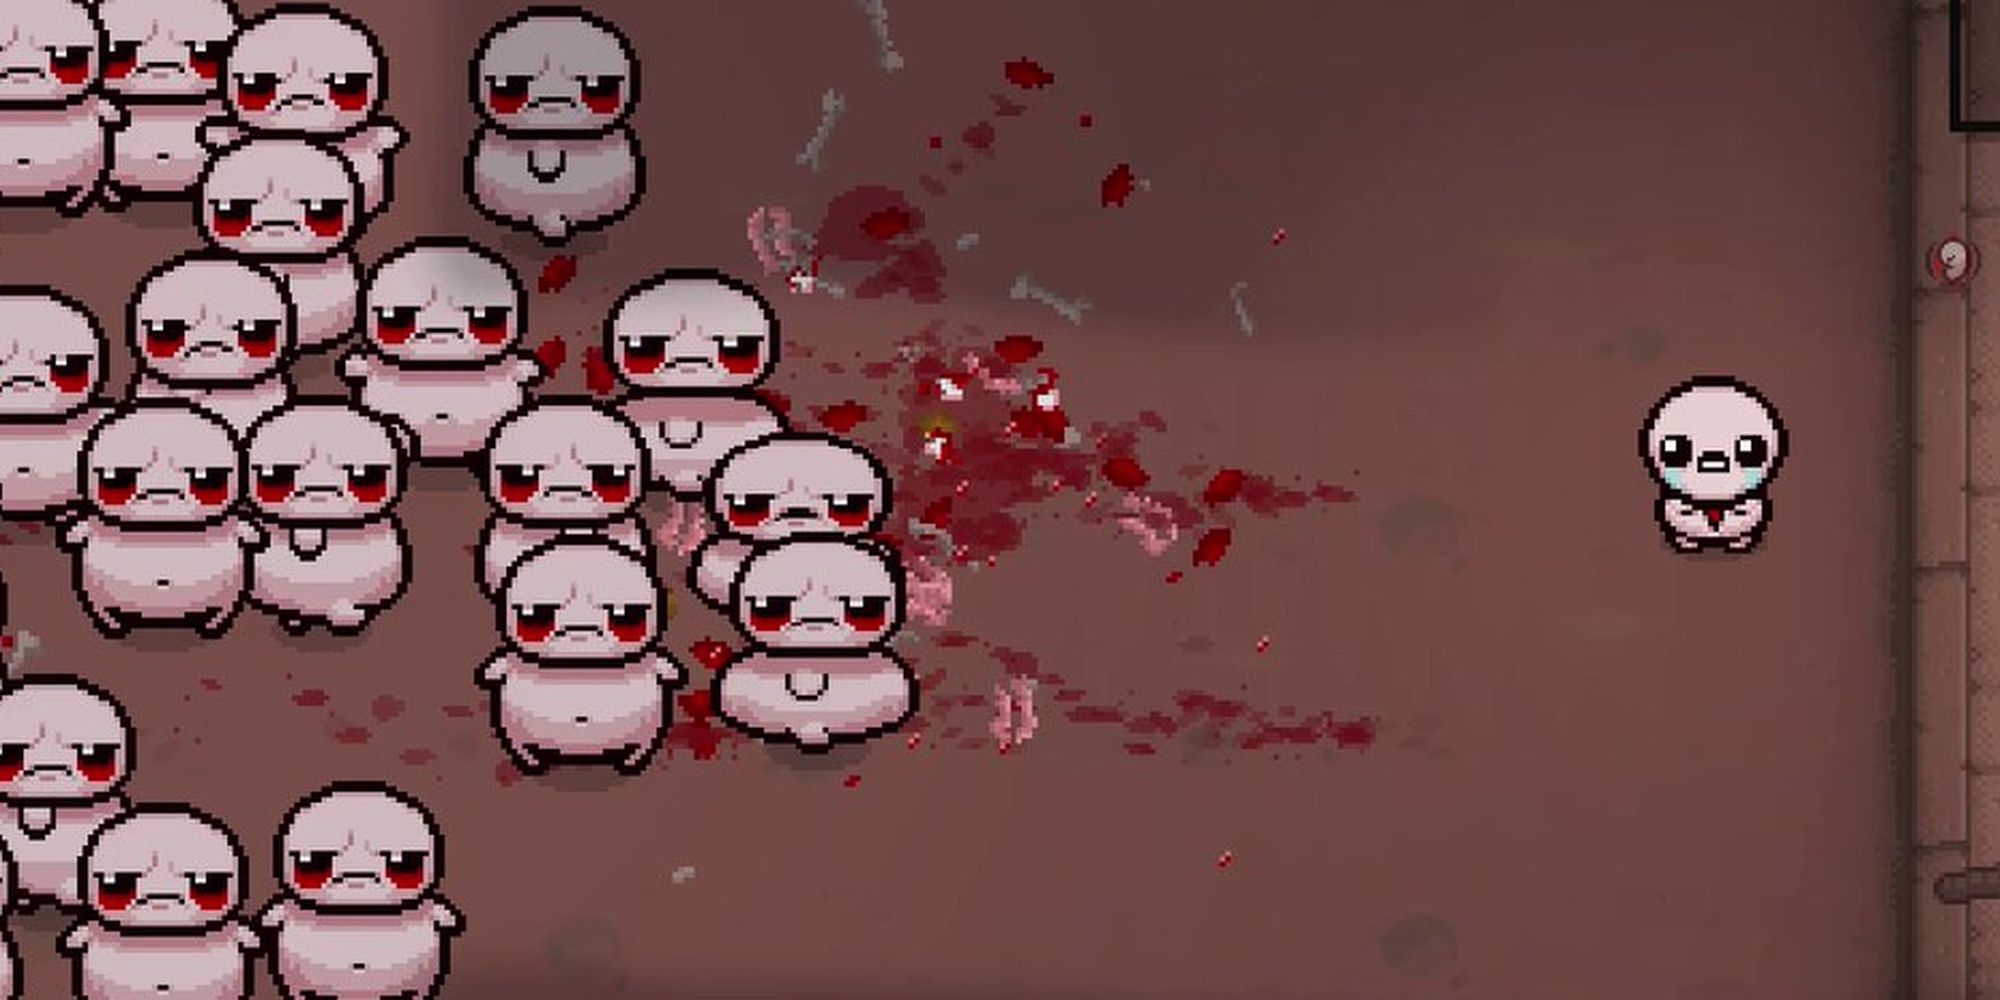 The Binding of Isaac: Repentance. Isaac stands alone on the right, and many large enemies are approaching him from the left.